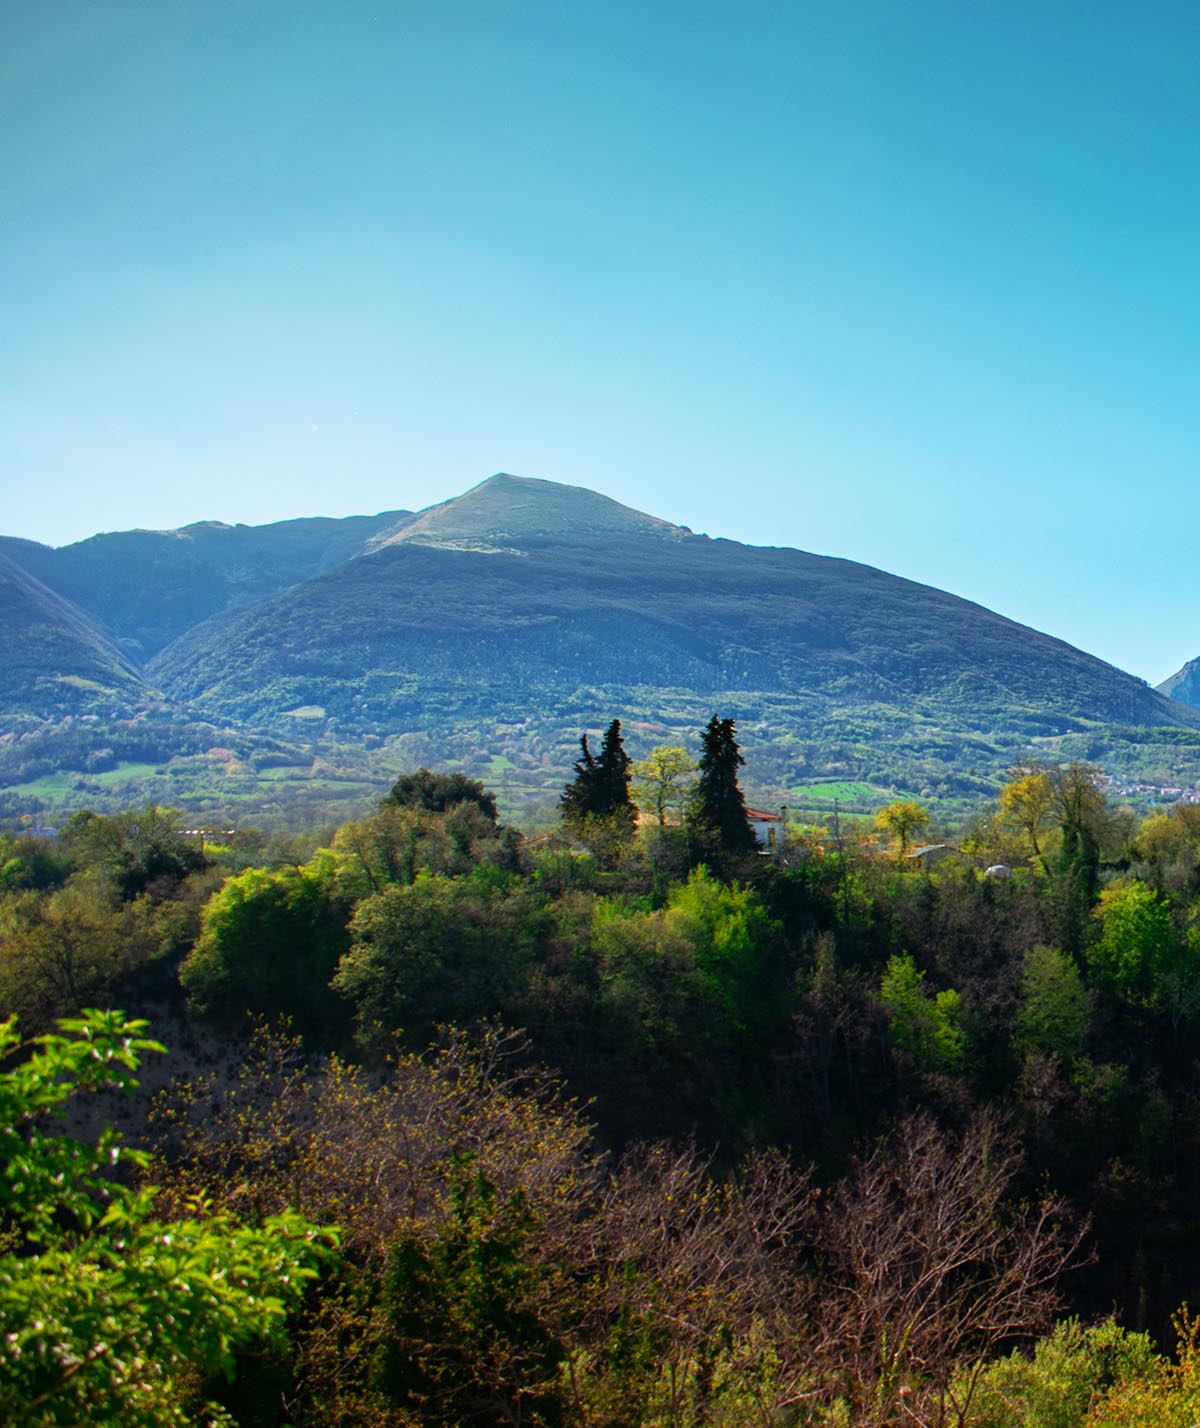 Foltrone Mountain and the Valley of the Squirrels